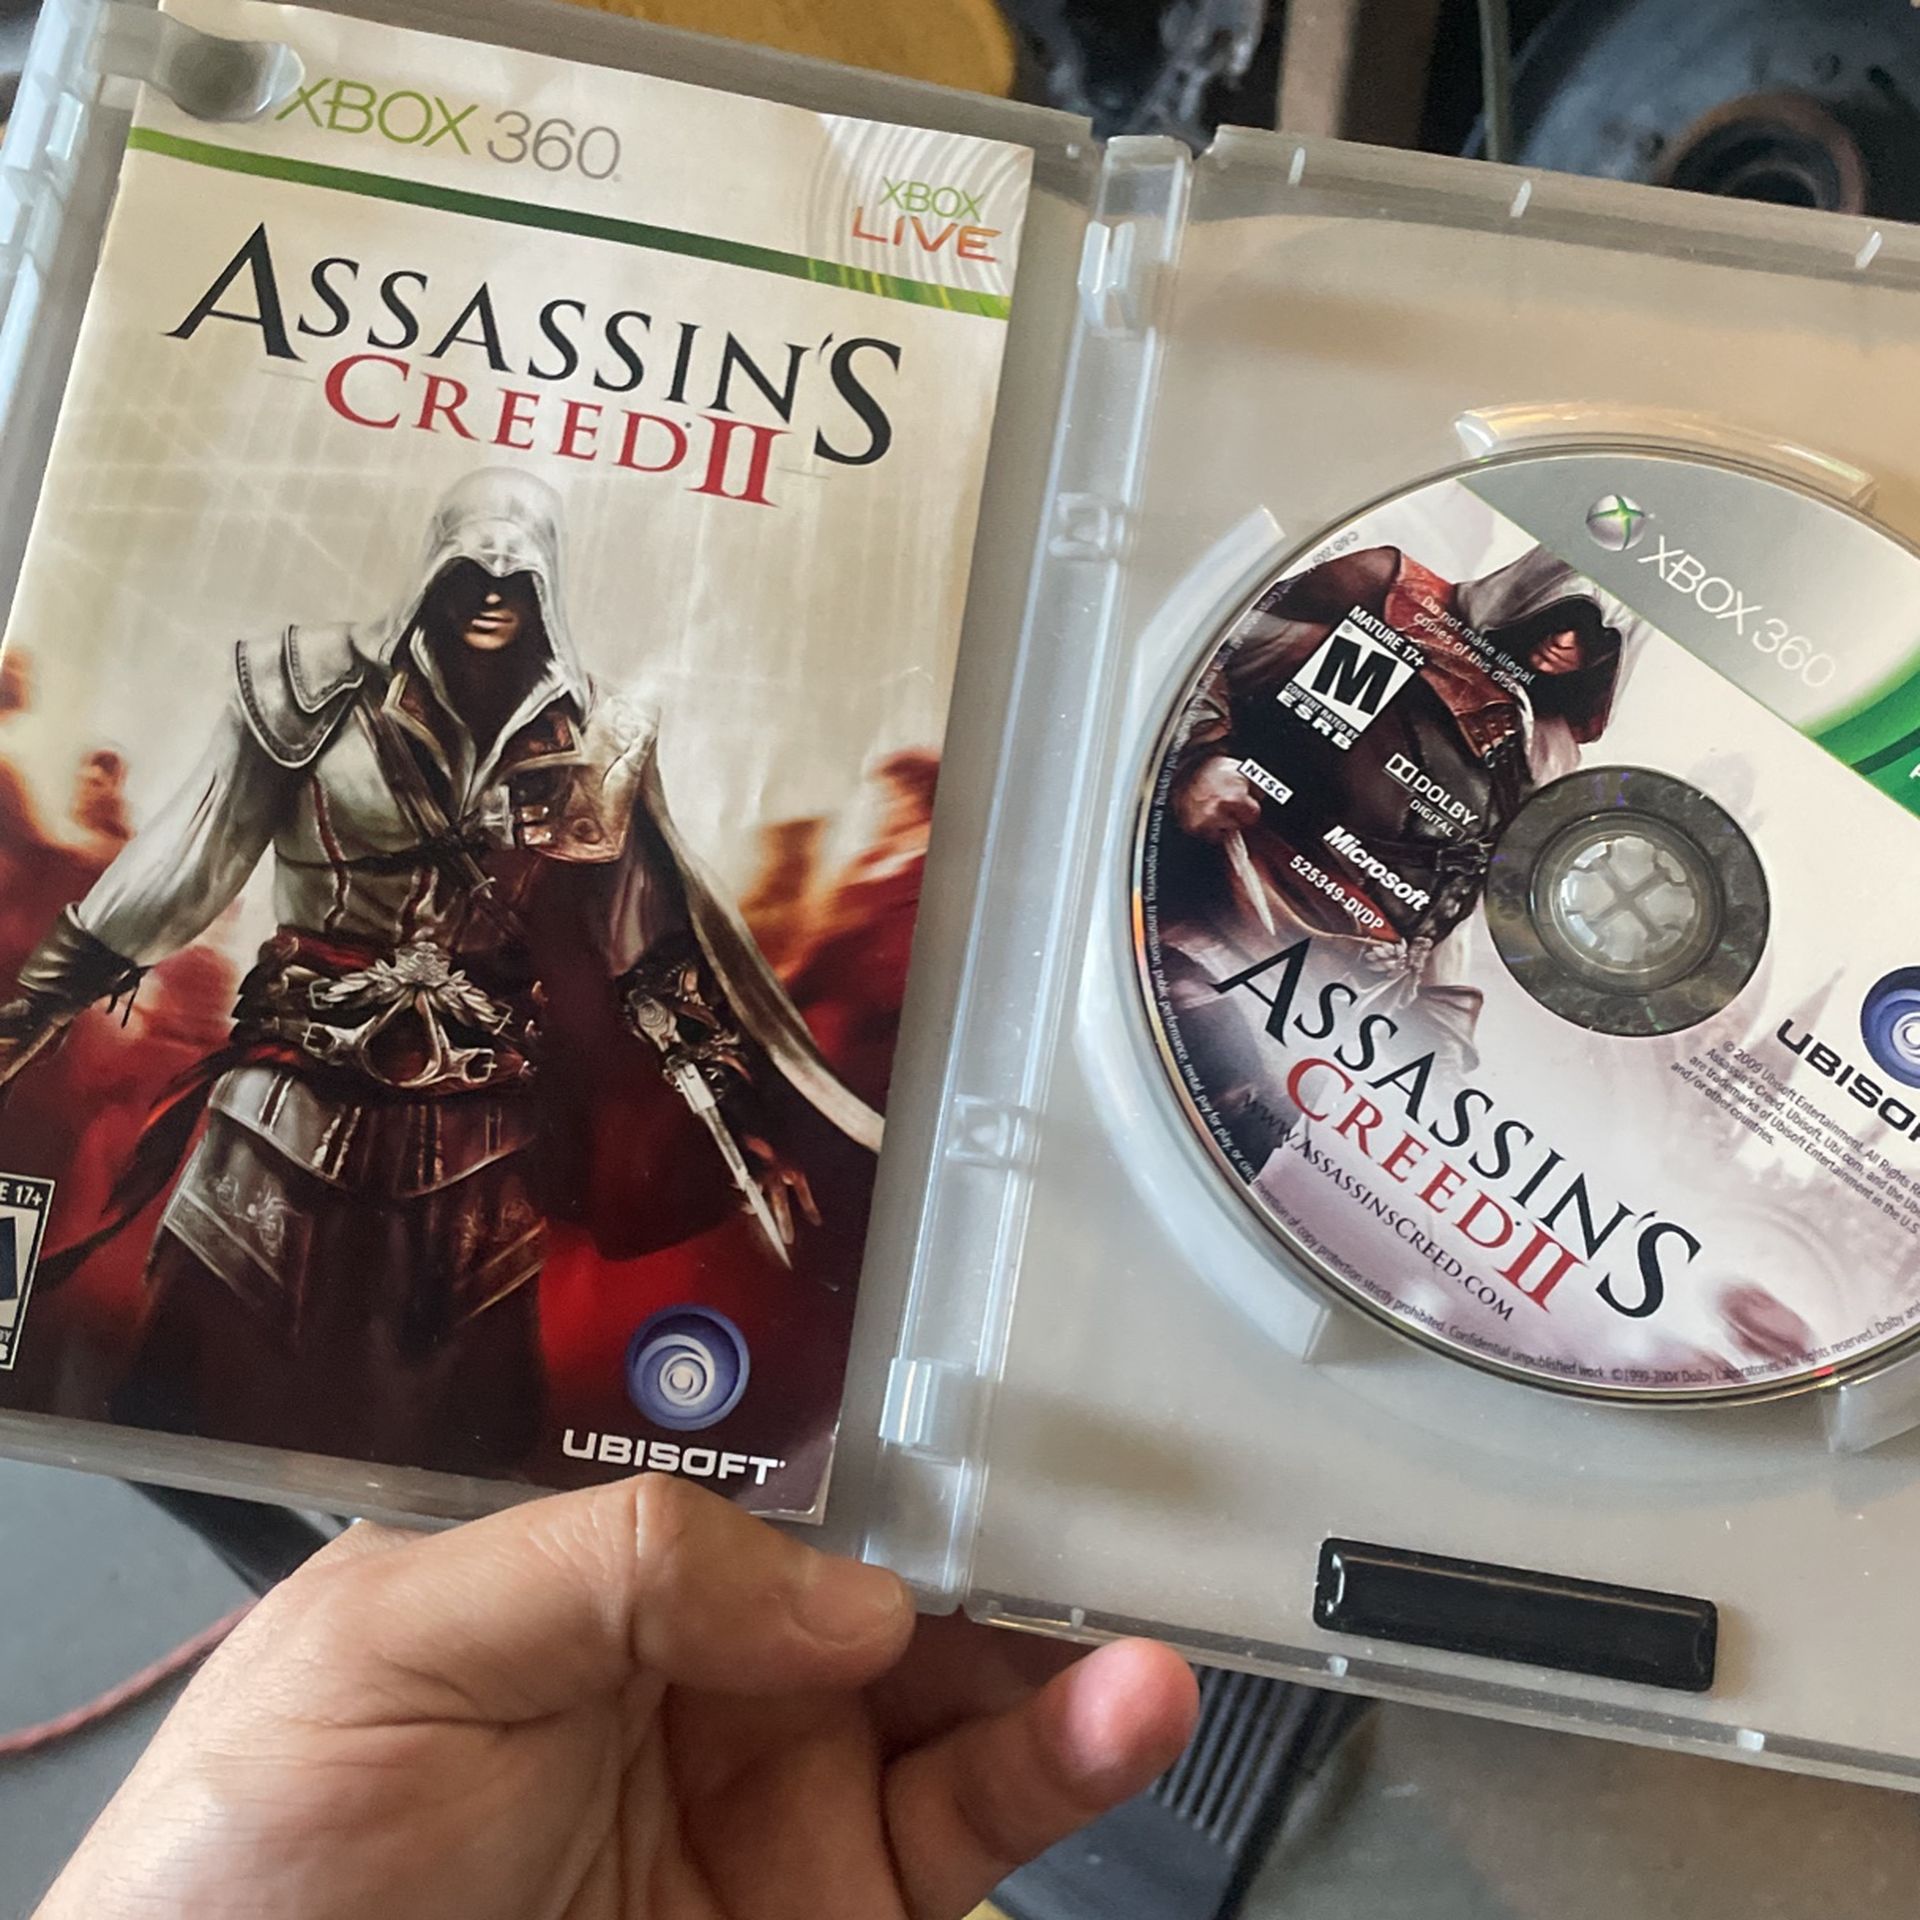 Assassins Creed 2 Xbox 360 Game